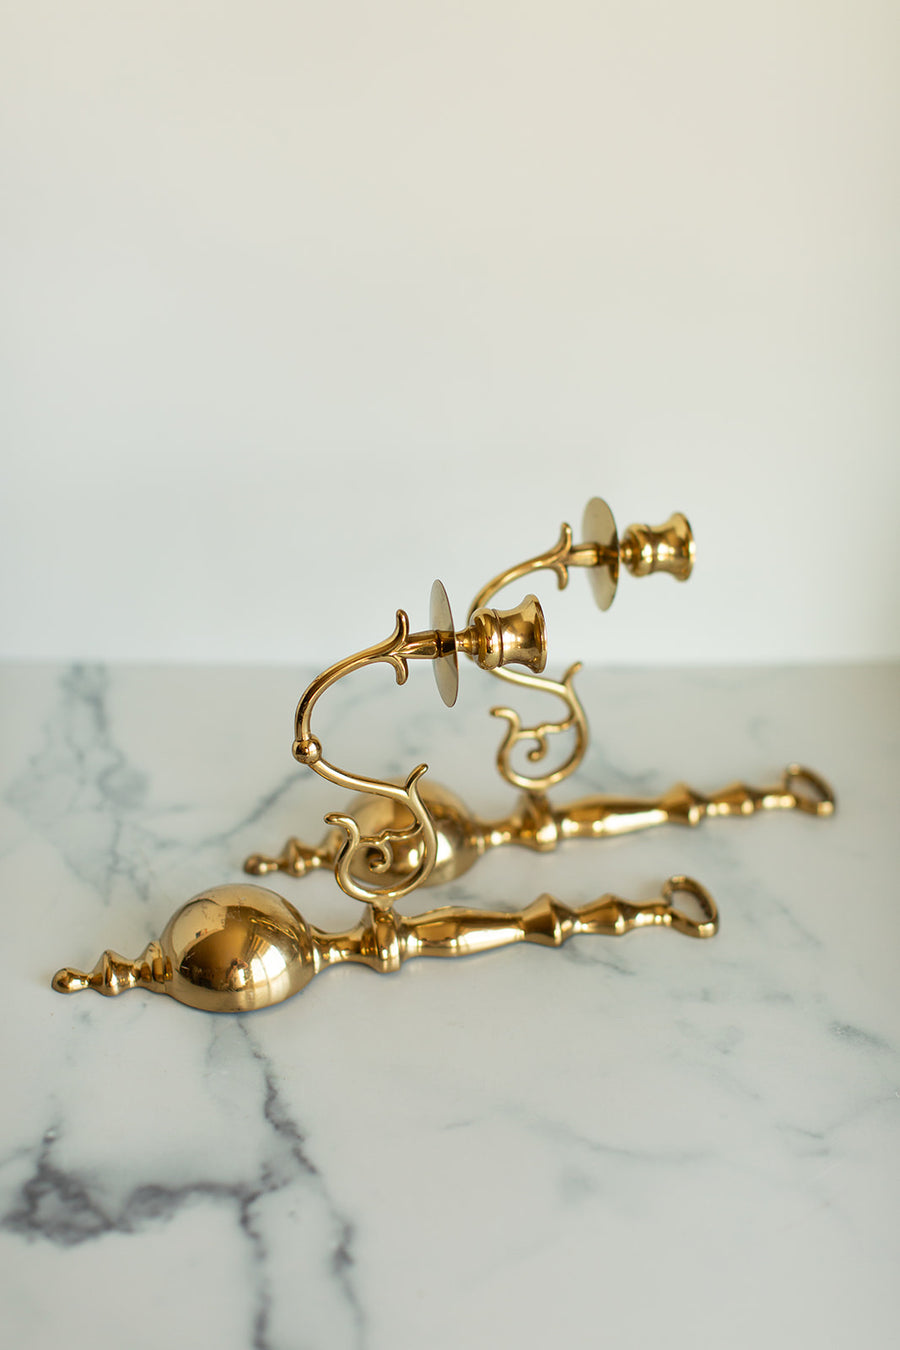 Pair of Brass Candle Sconces